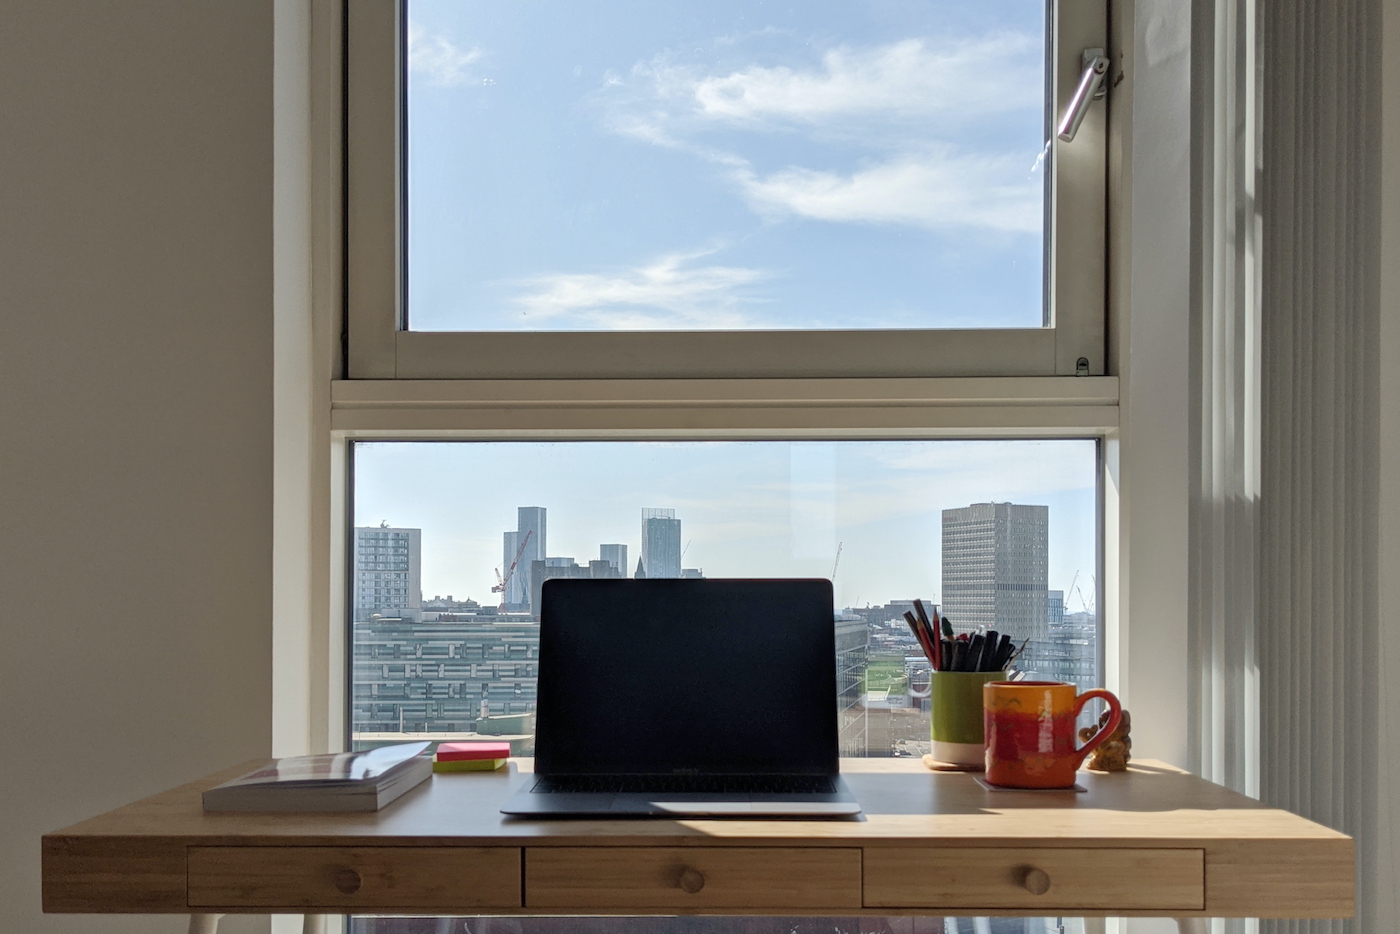 Laptop open on a desk in front of a window, out that window a blue sky and Manchester skyline